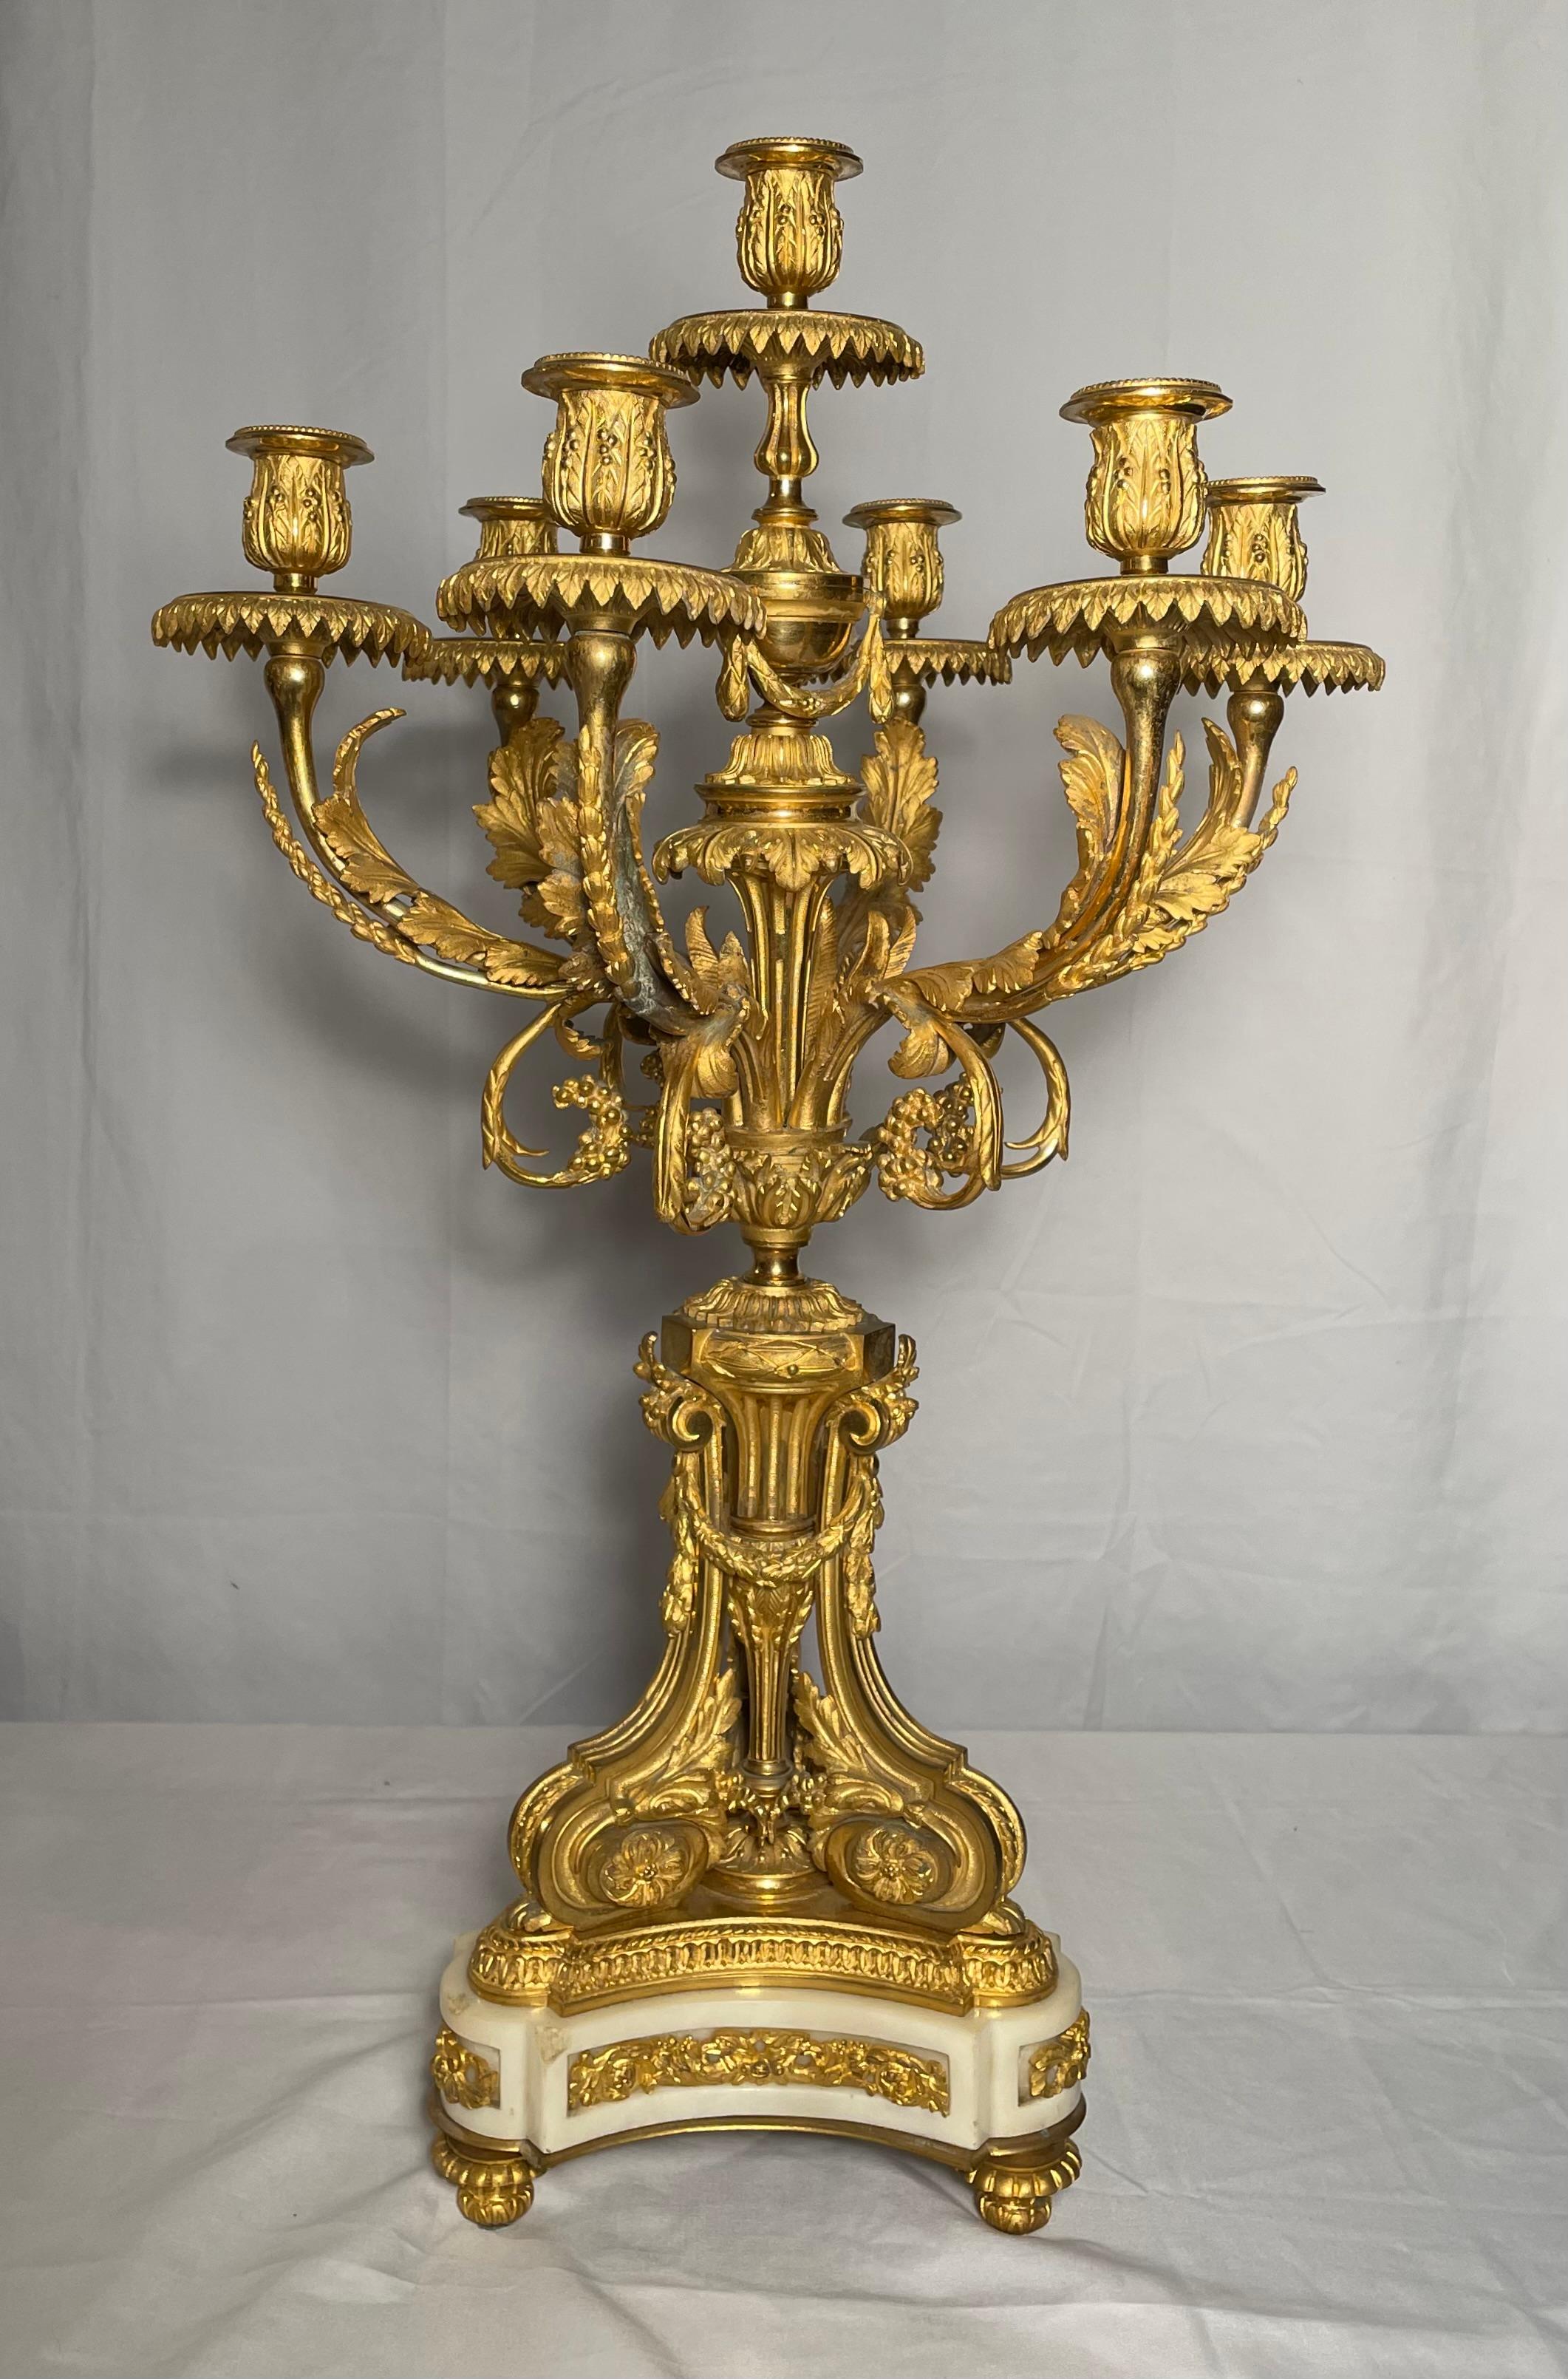 Pair of magnificent quality antique French Louis XVI Gold-Bronze Carrara Marble Candelabras, circa 1850-70.